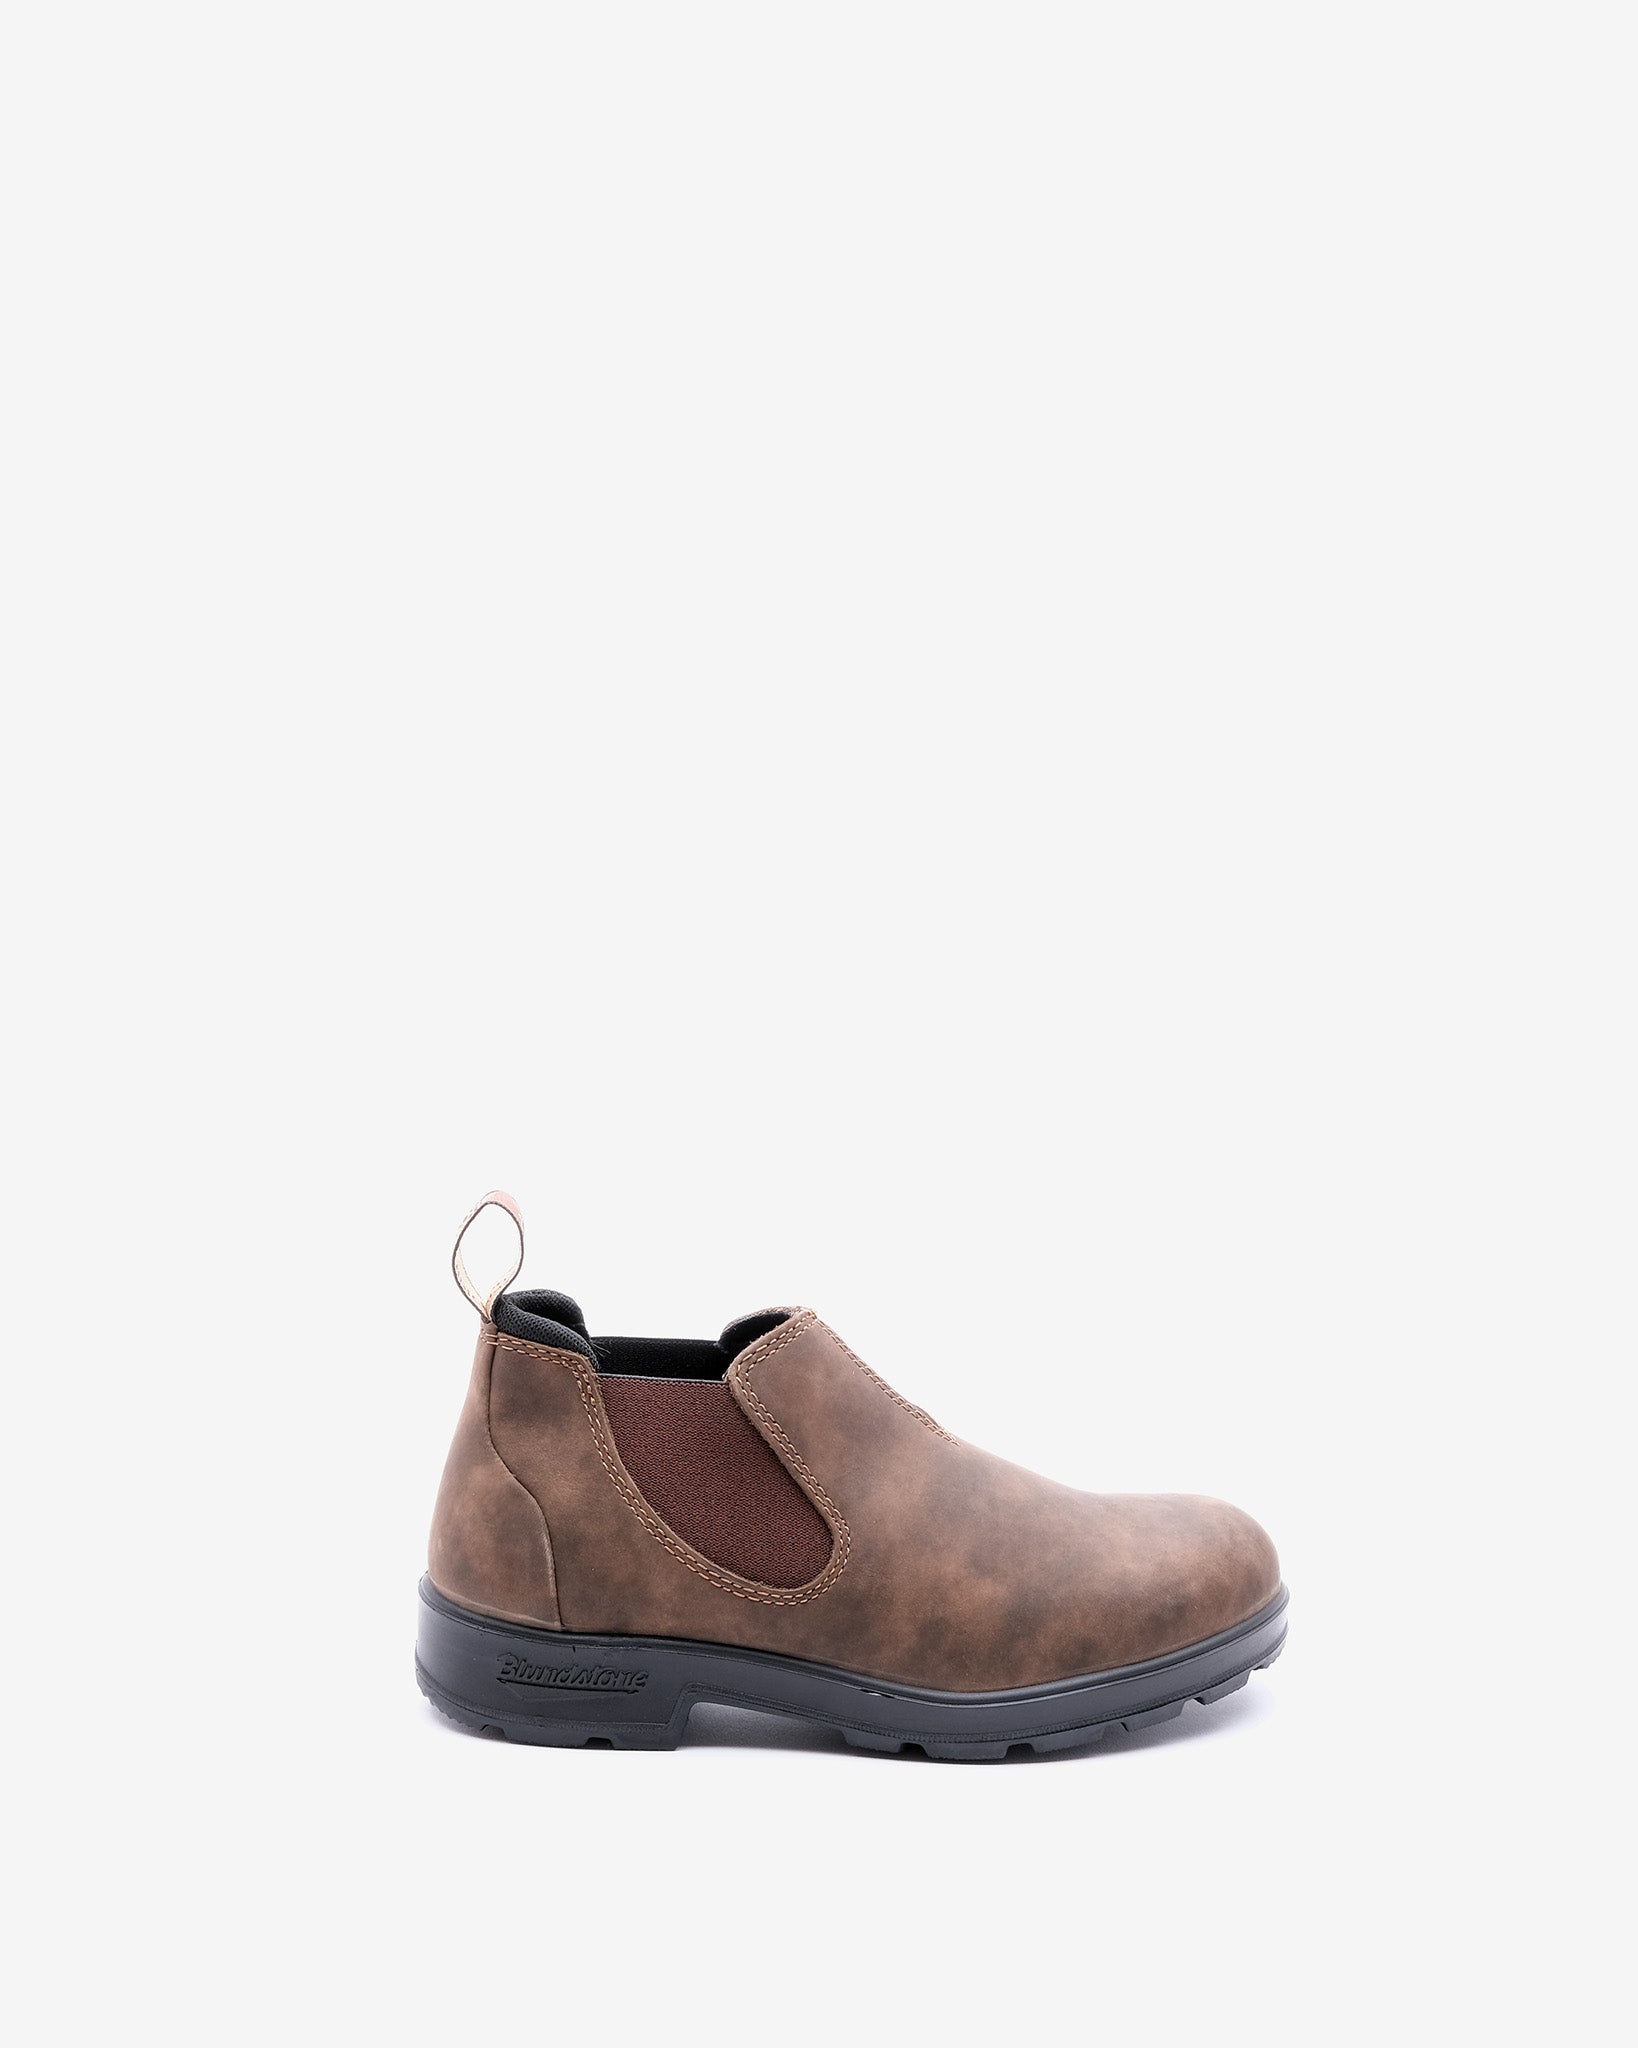 2036 Rustic Brown Leather Shoes